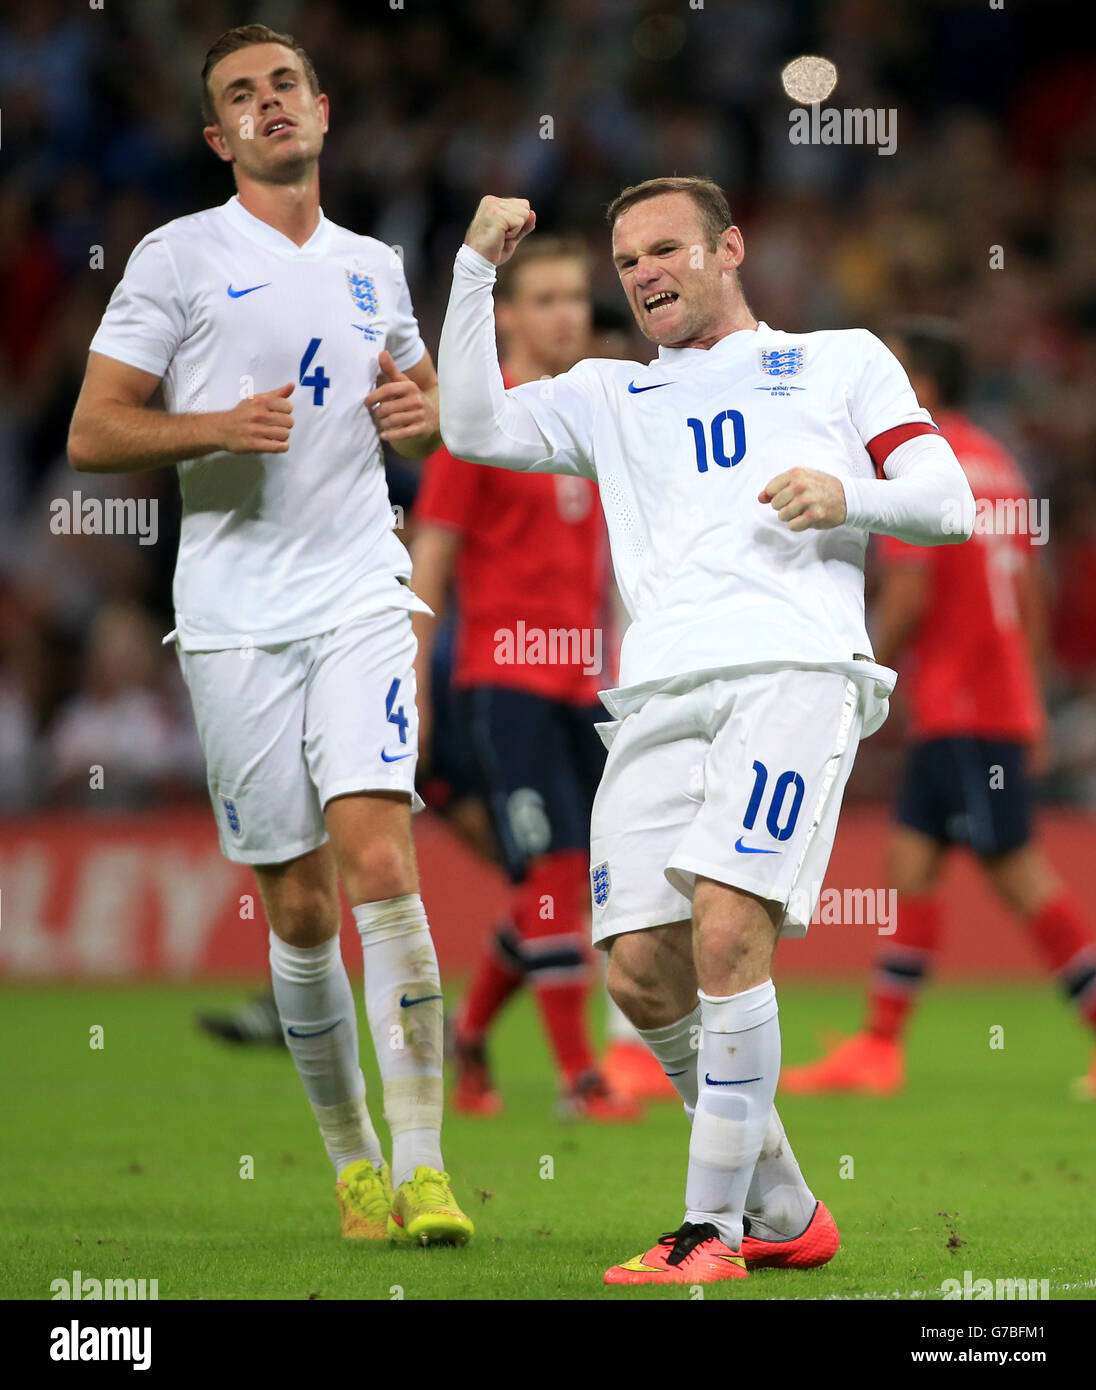 England's Wayne Rooney celebrates scoring his side's first goal of the game from the penalty spot with teammate Jordan Henderson (left) during the International Friendly at Wembley Stadium, London. PRESS ASSOCIATION Photo. Picture date: Wednesday September 3, 2014. See PA story SOCCER England. Photo credit should read: Nick Potts/PA Wire. Stock Photo